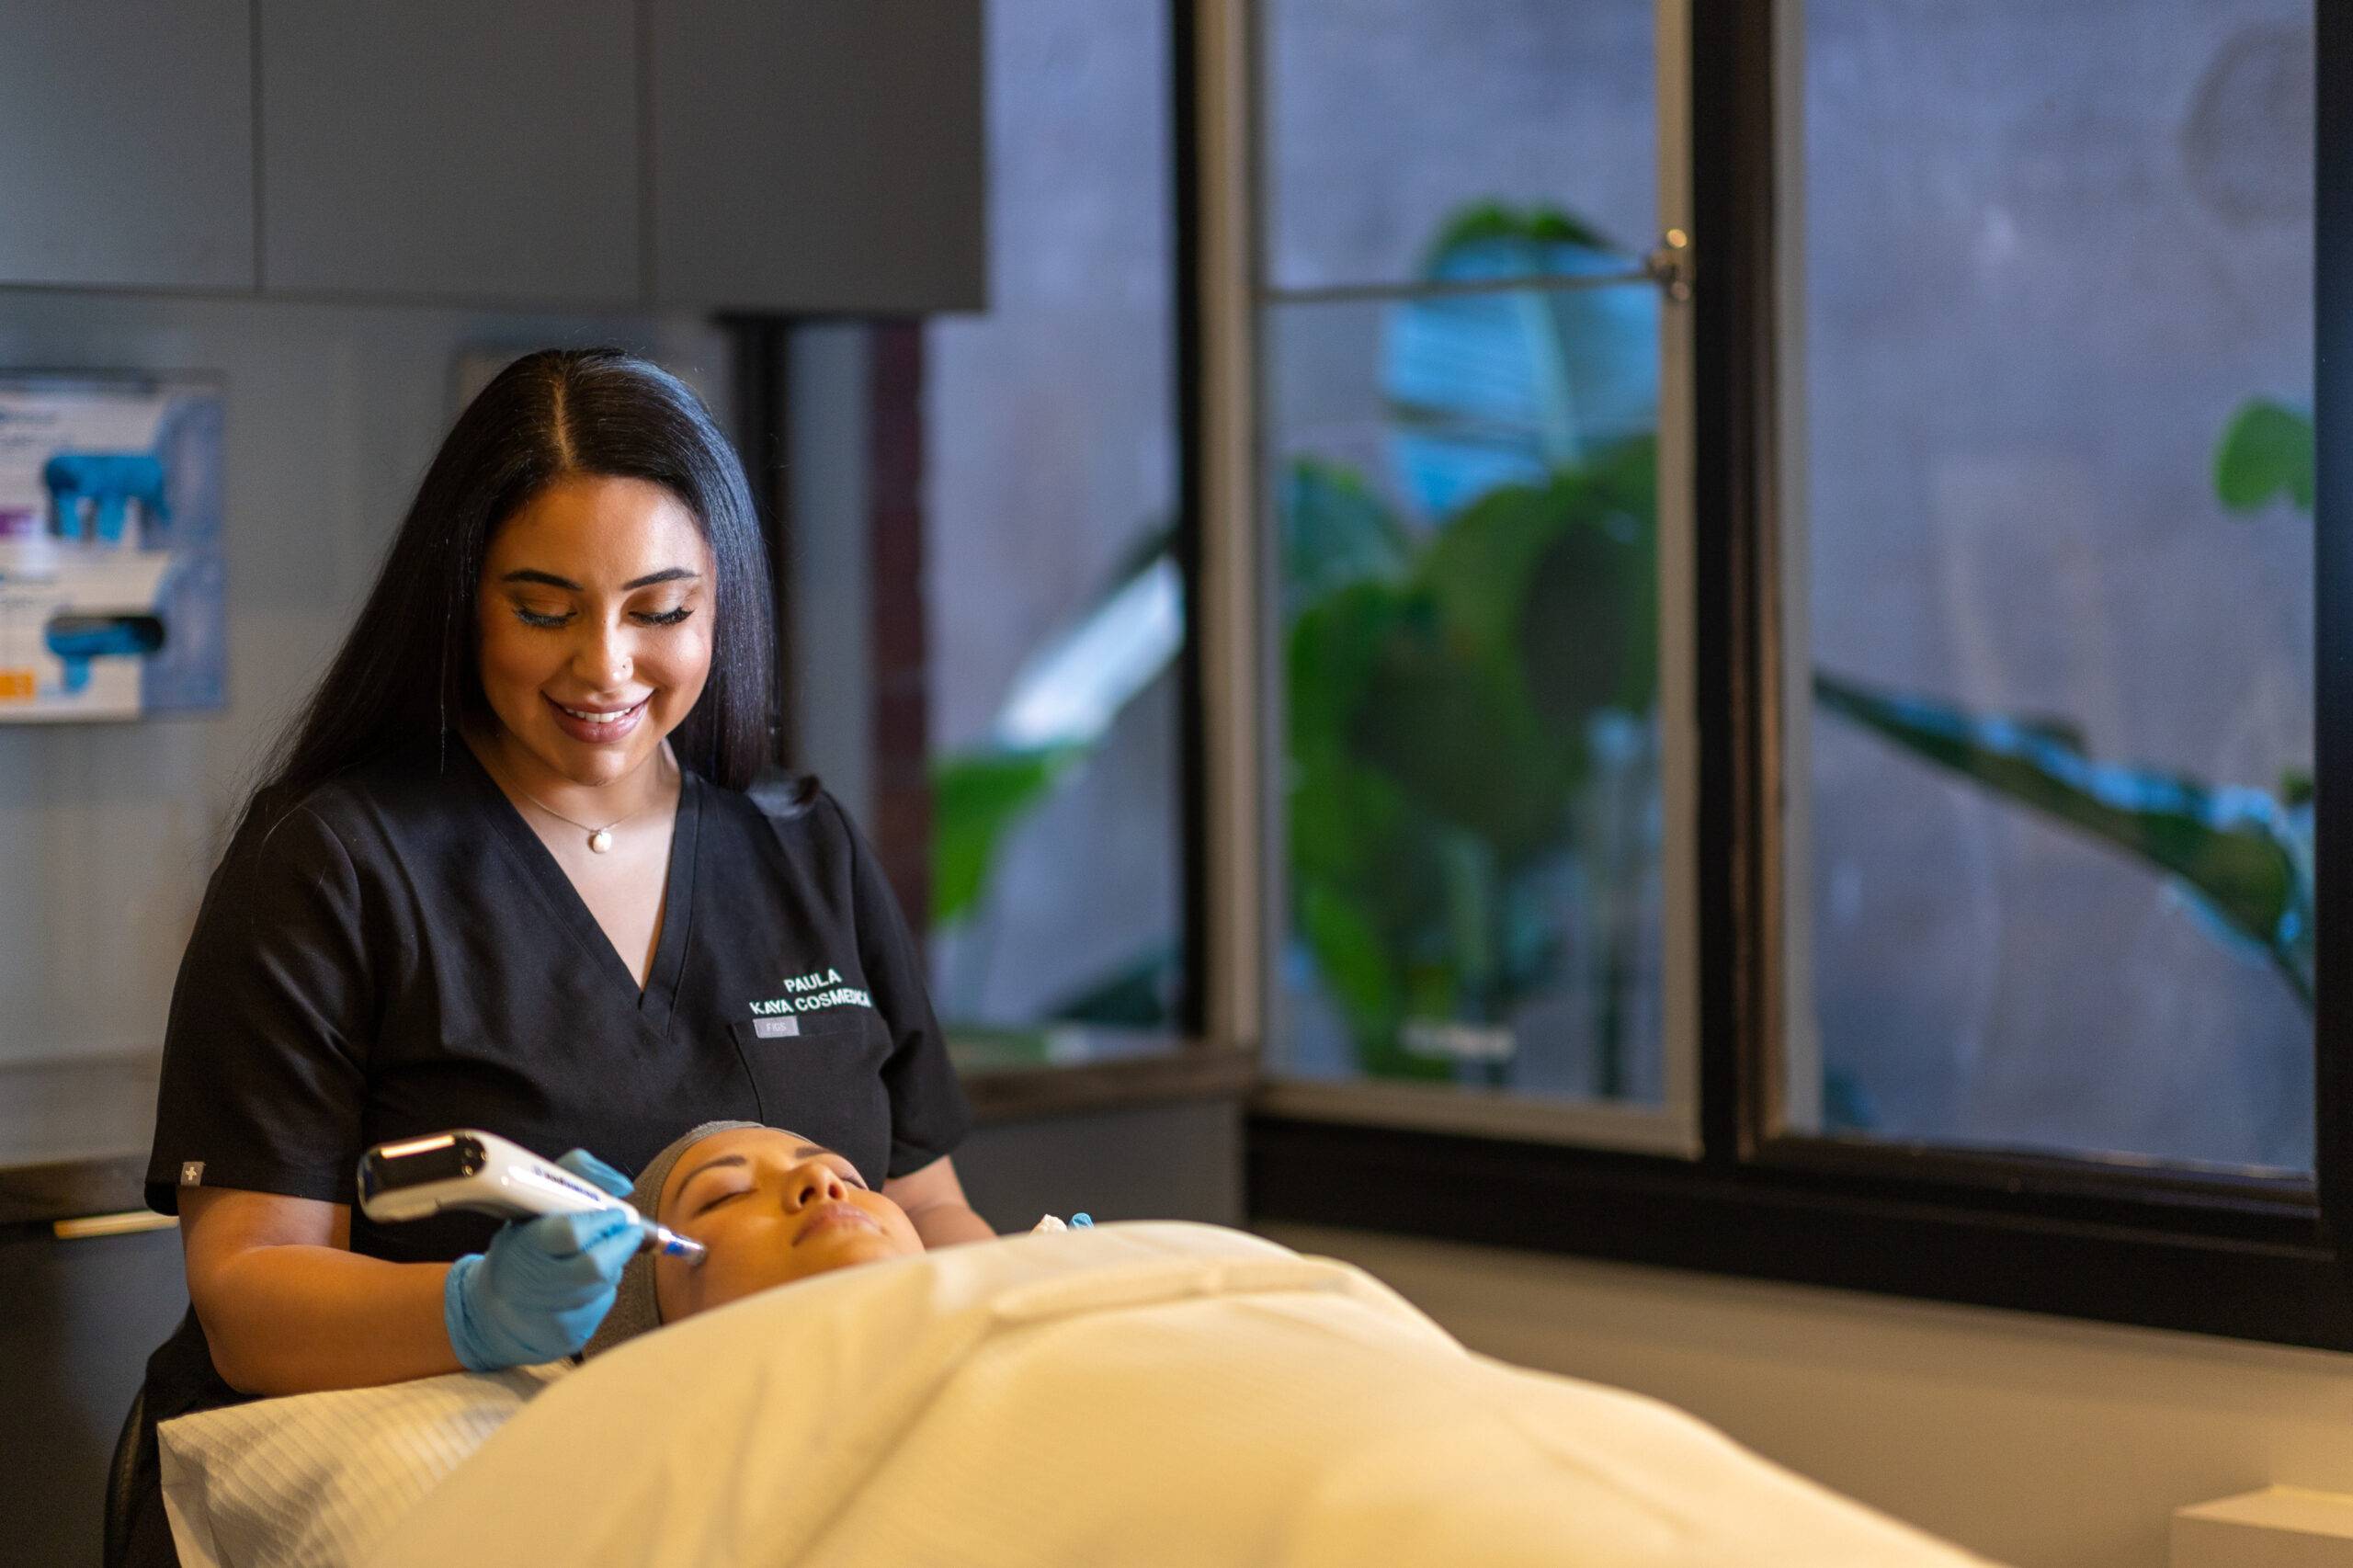 A female aesthetician in a black uniform performs a microneedling skin treatment on a reclining female client in a well-lit room with plants visible through the window.